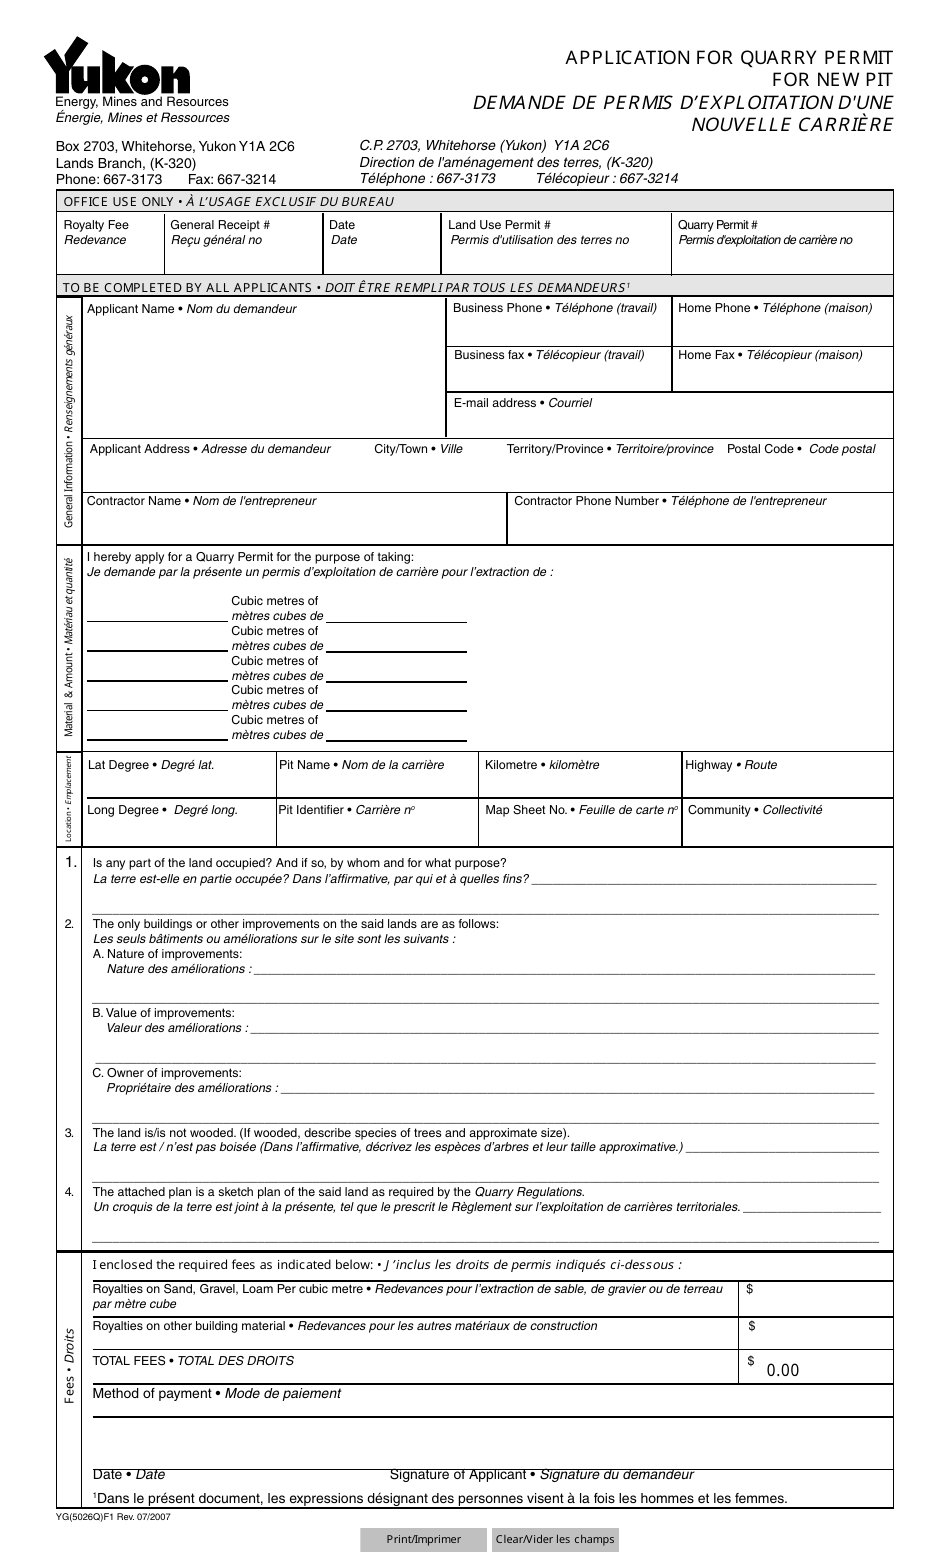 Form YG5026 Application for Quarry Permit for New Pit - Yukon, Canada (English / French), Page 1